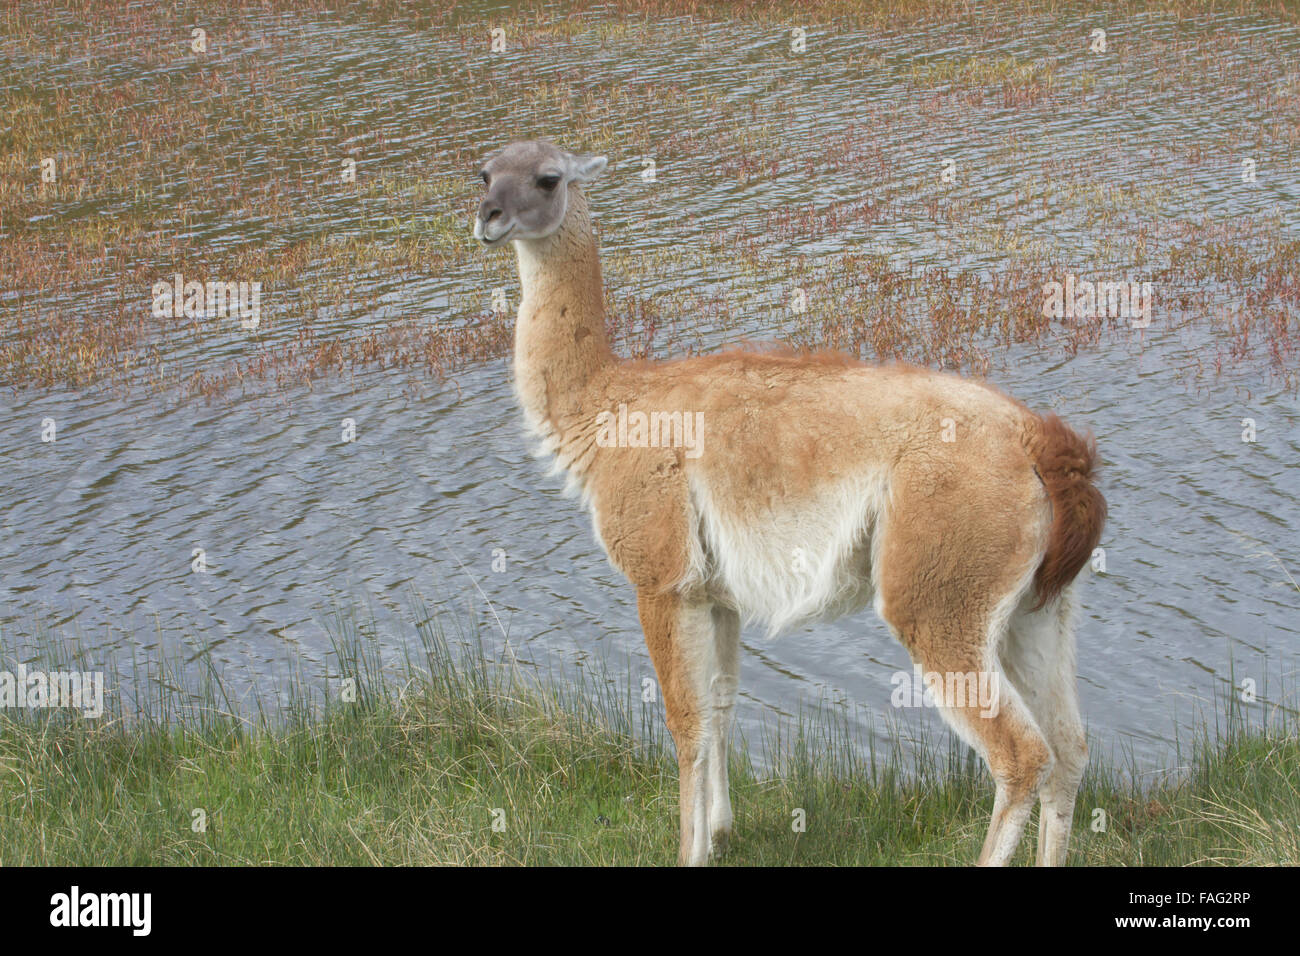 Profile of guanaco standing by waters edge in Chilean steppe. Stock Photo